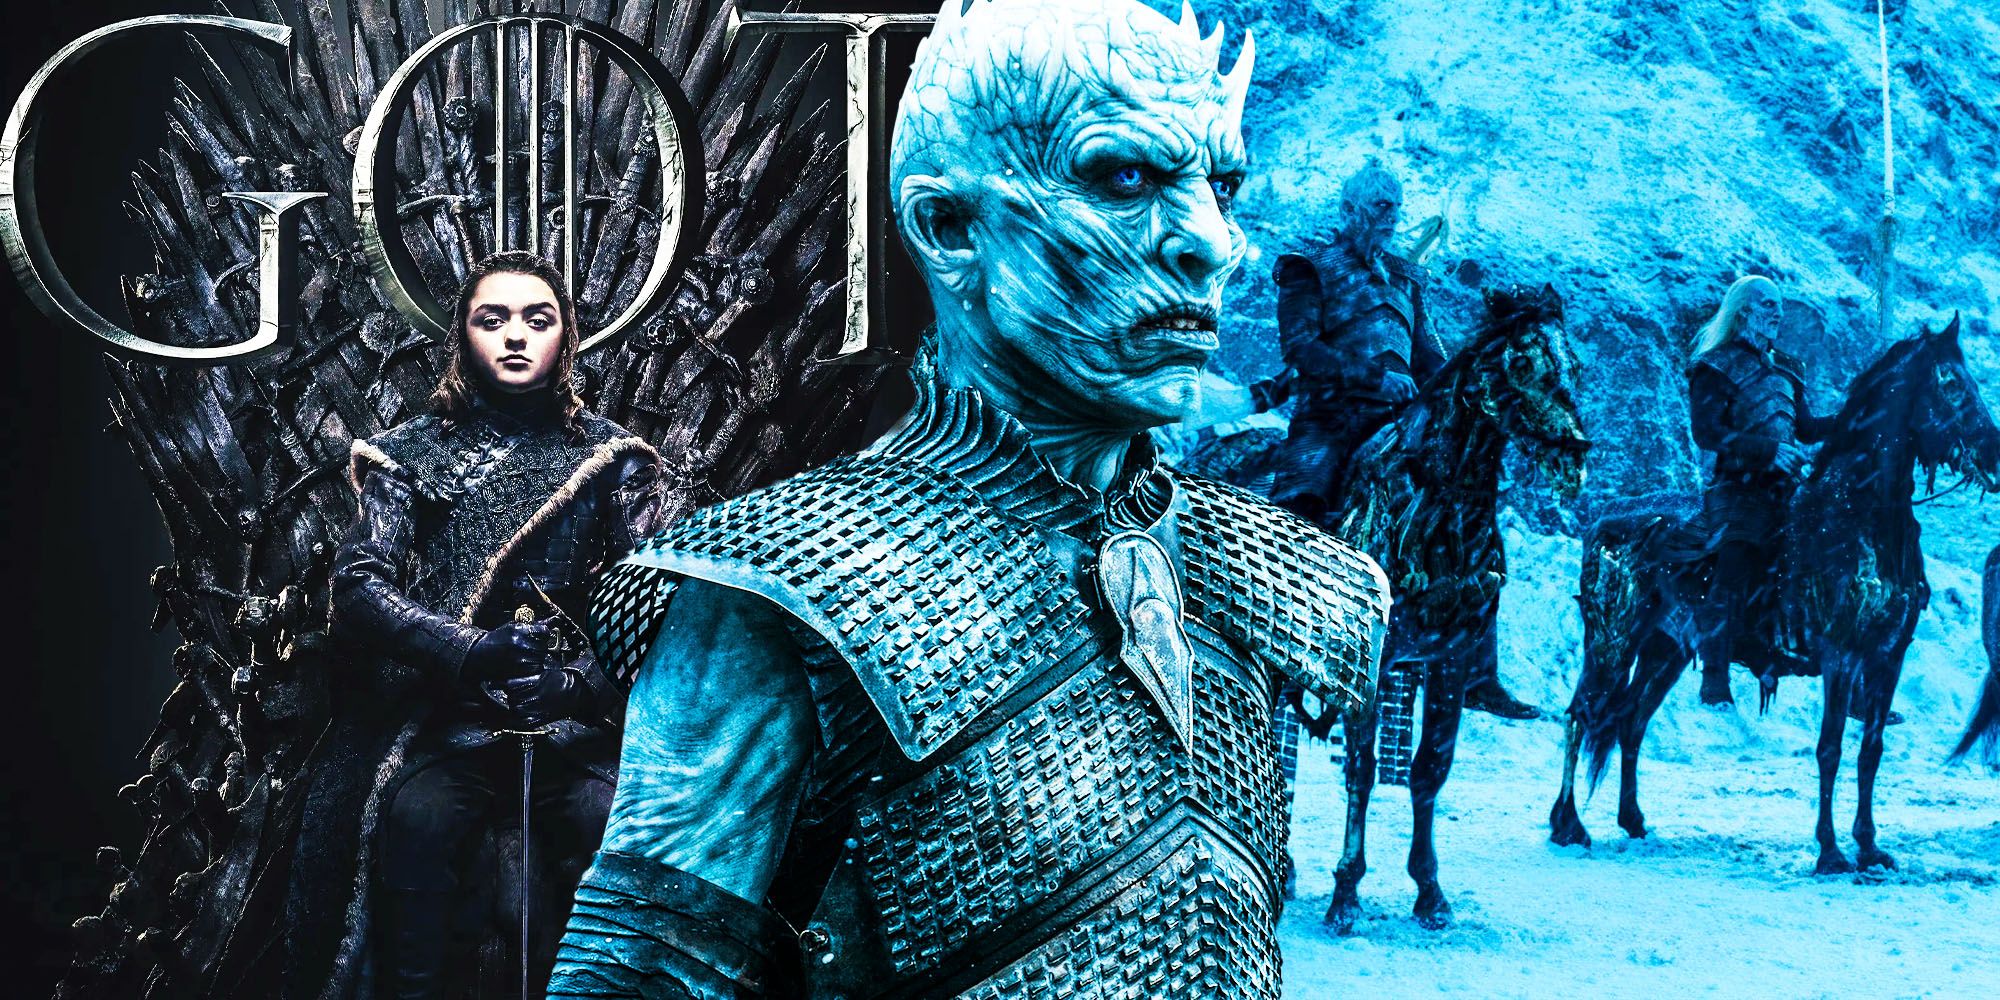 Game of thrones 30 million dollars cancelled prequel white walkers